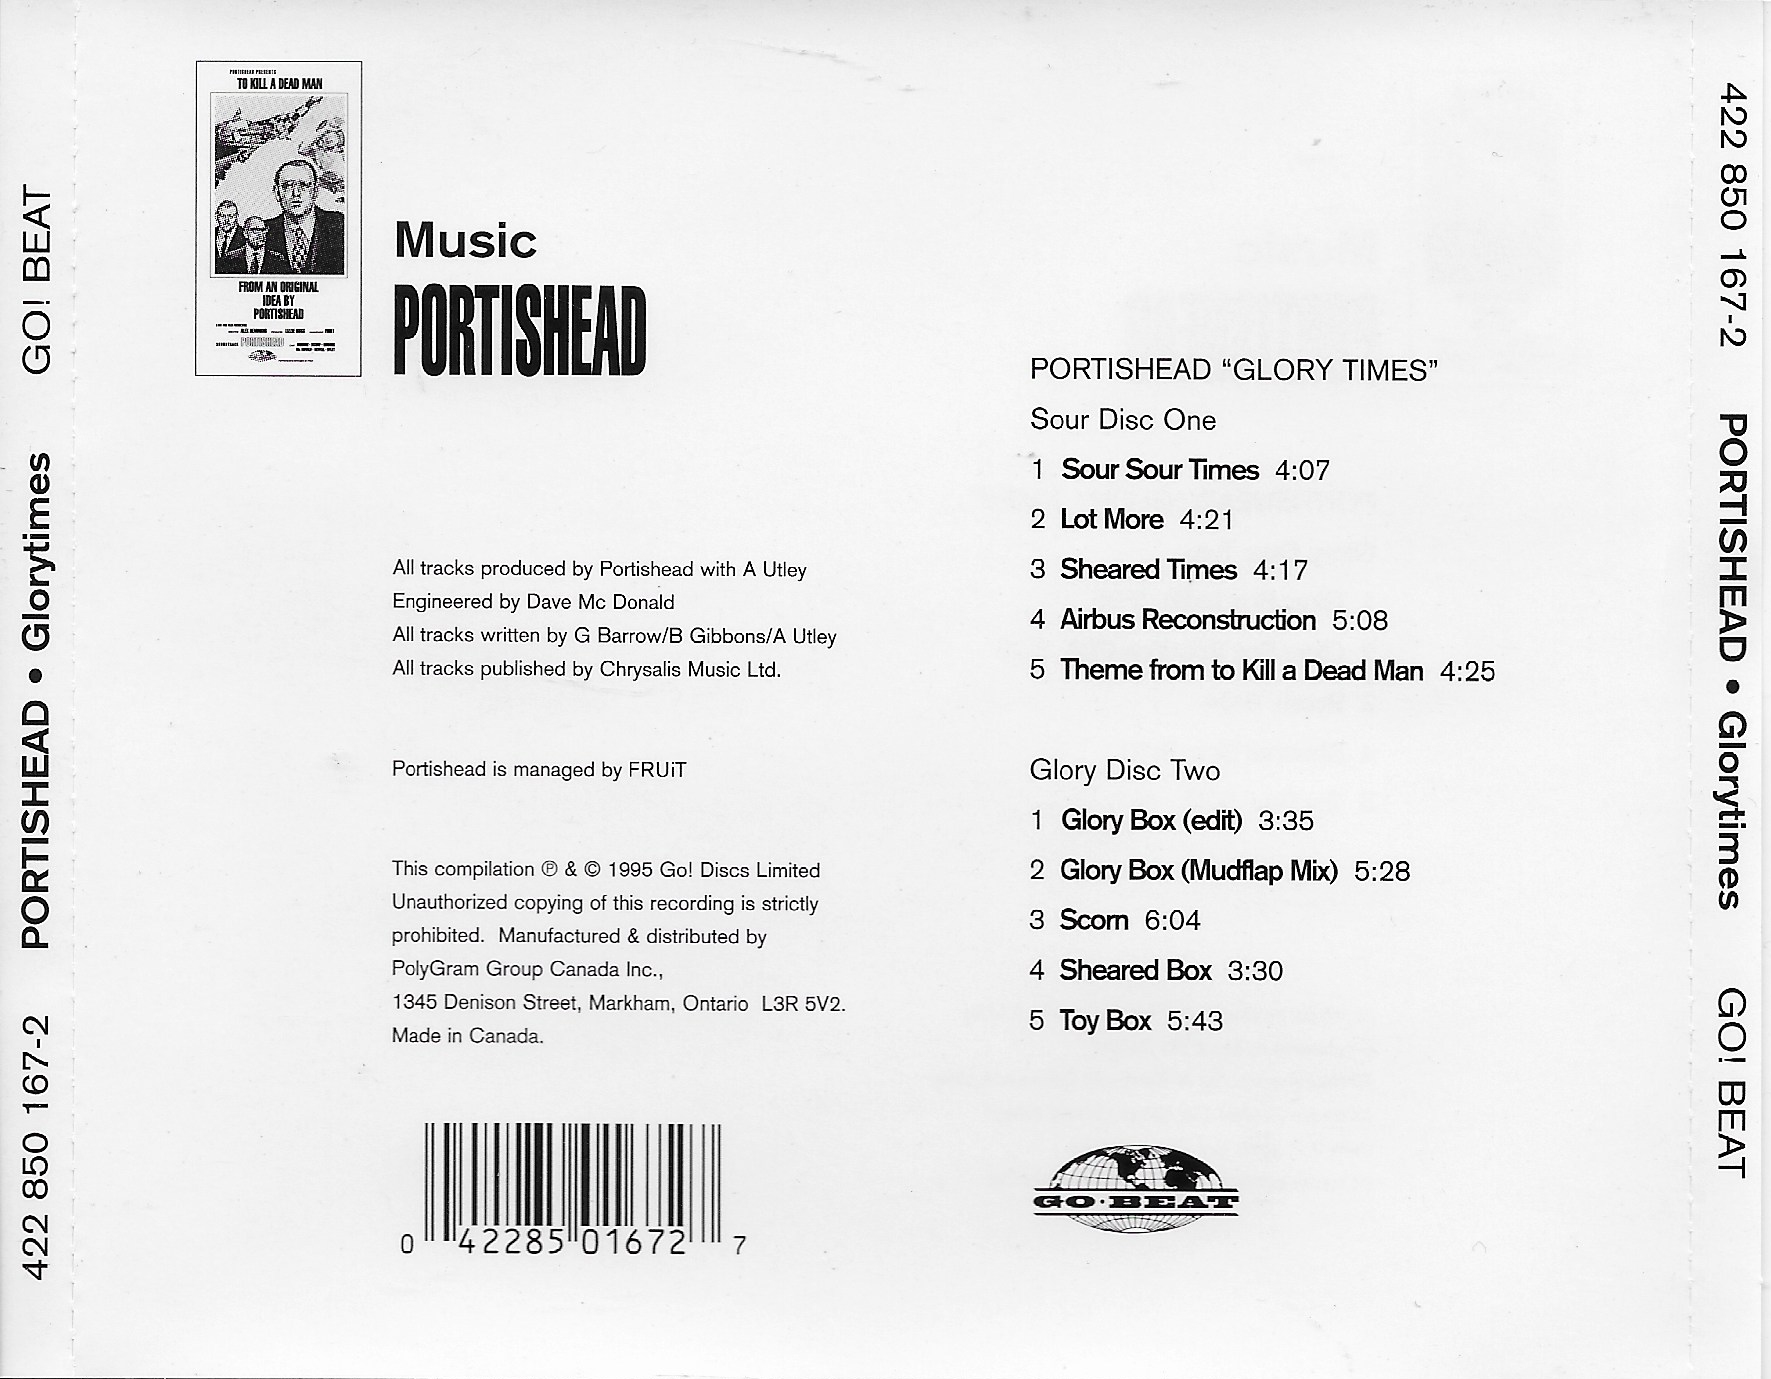 Picture of 422850167 - 2 Glory times by artist Portishead 